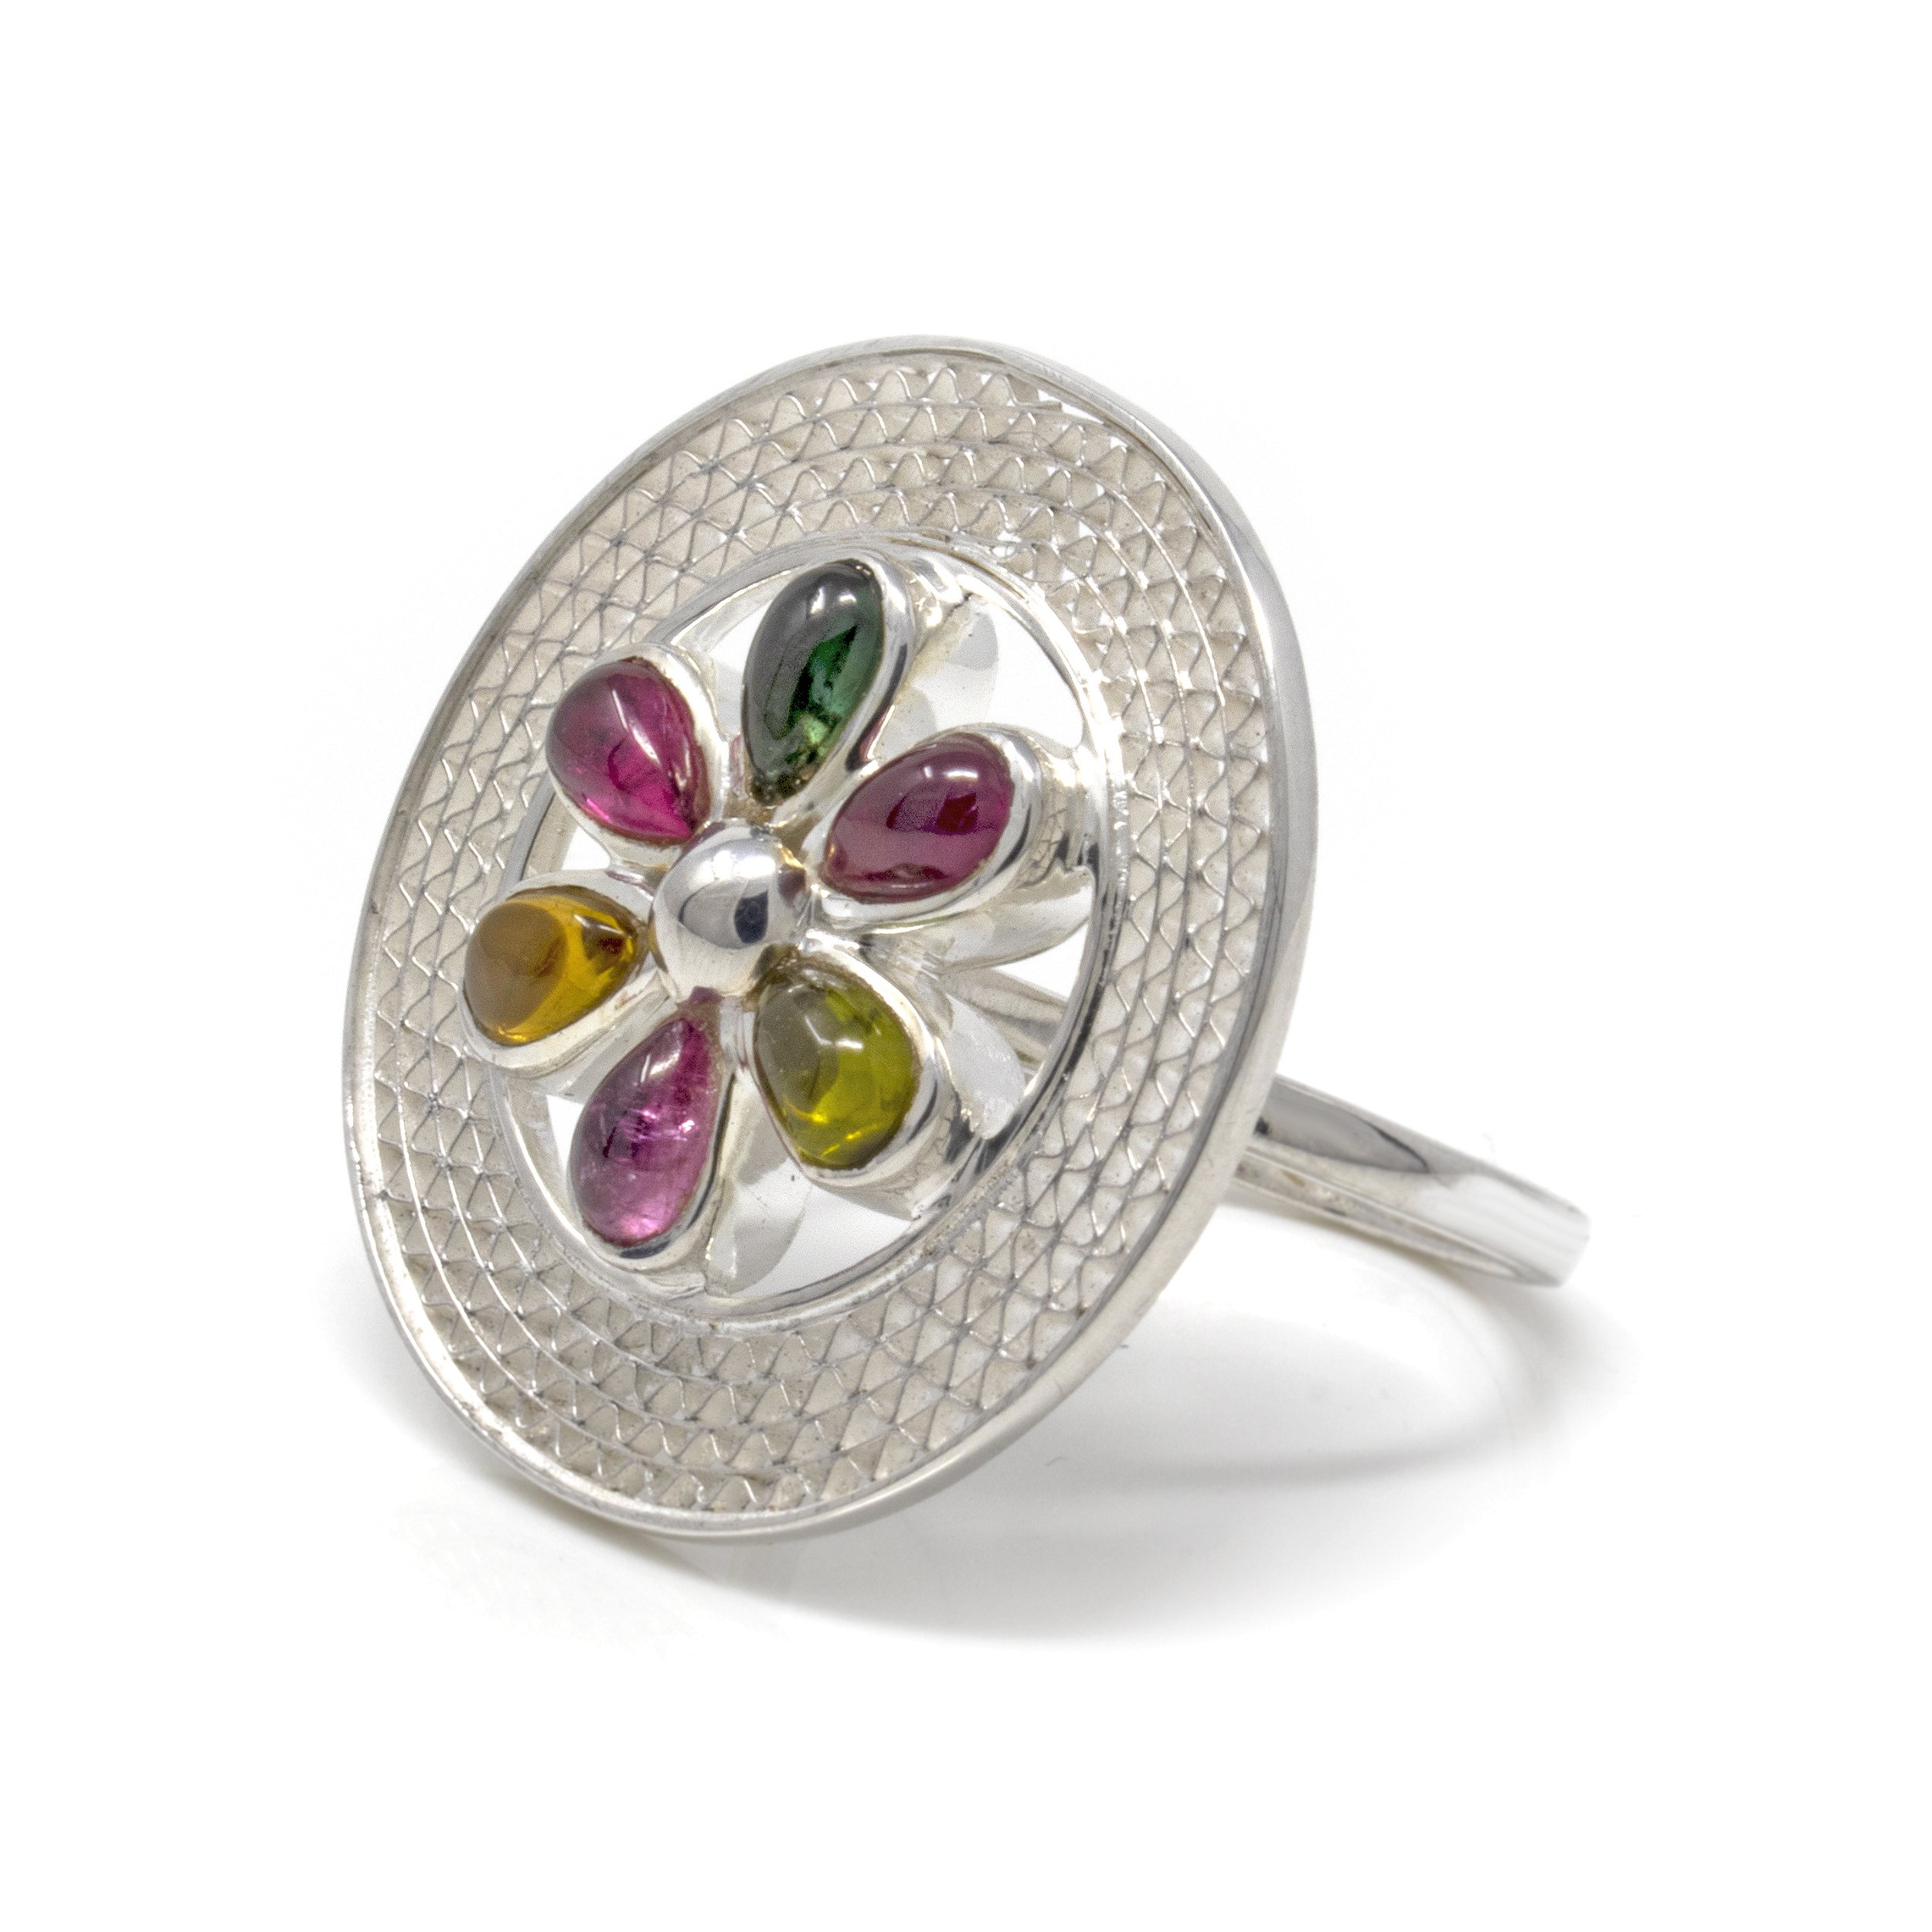 Multi Tourmaline Flower Ring - 6 Pear Cabochon Petals Set In Center Of Silver Mesh Open Circle Sz7